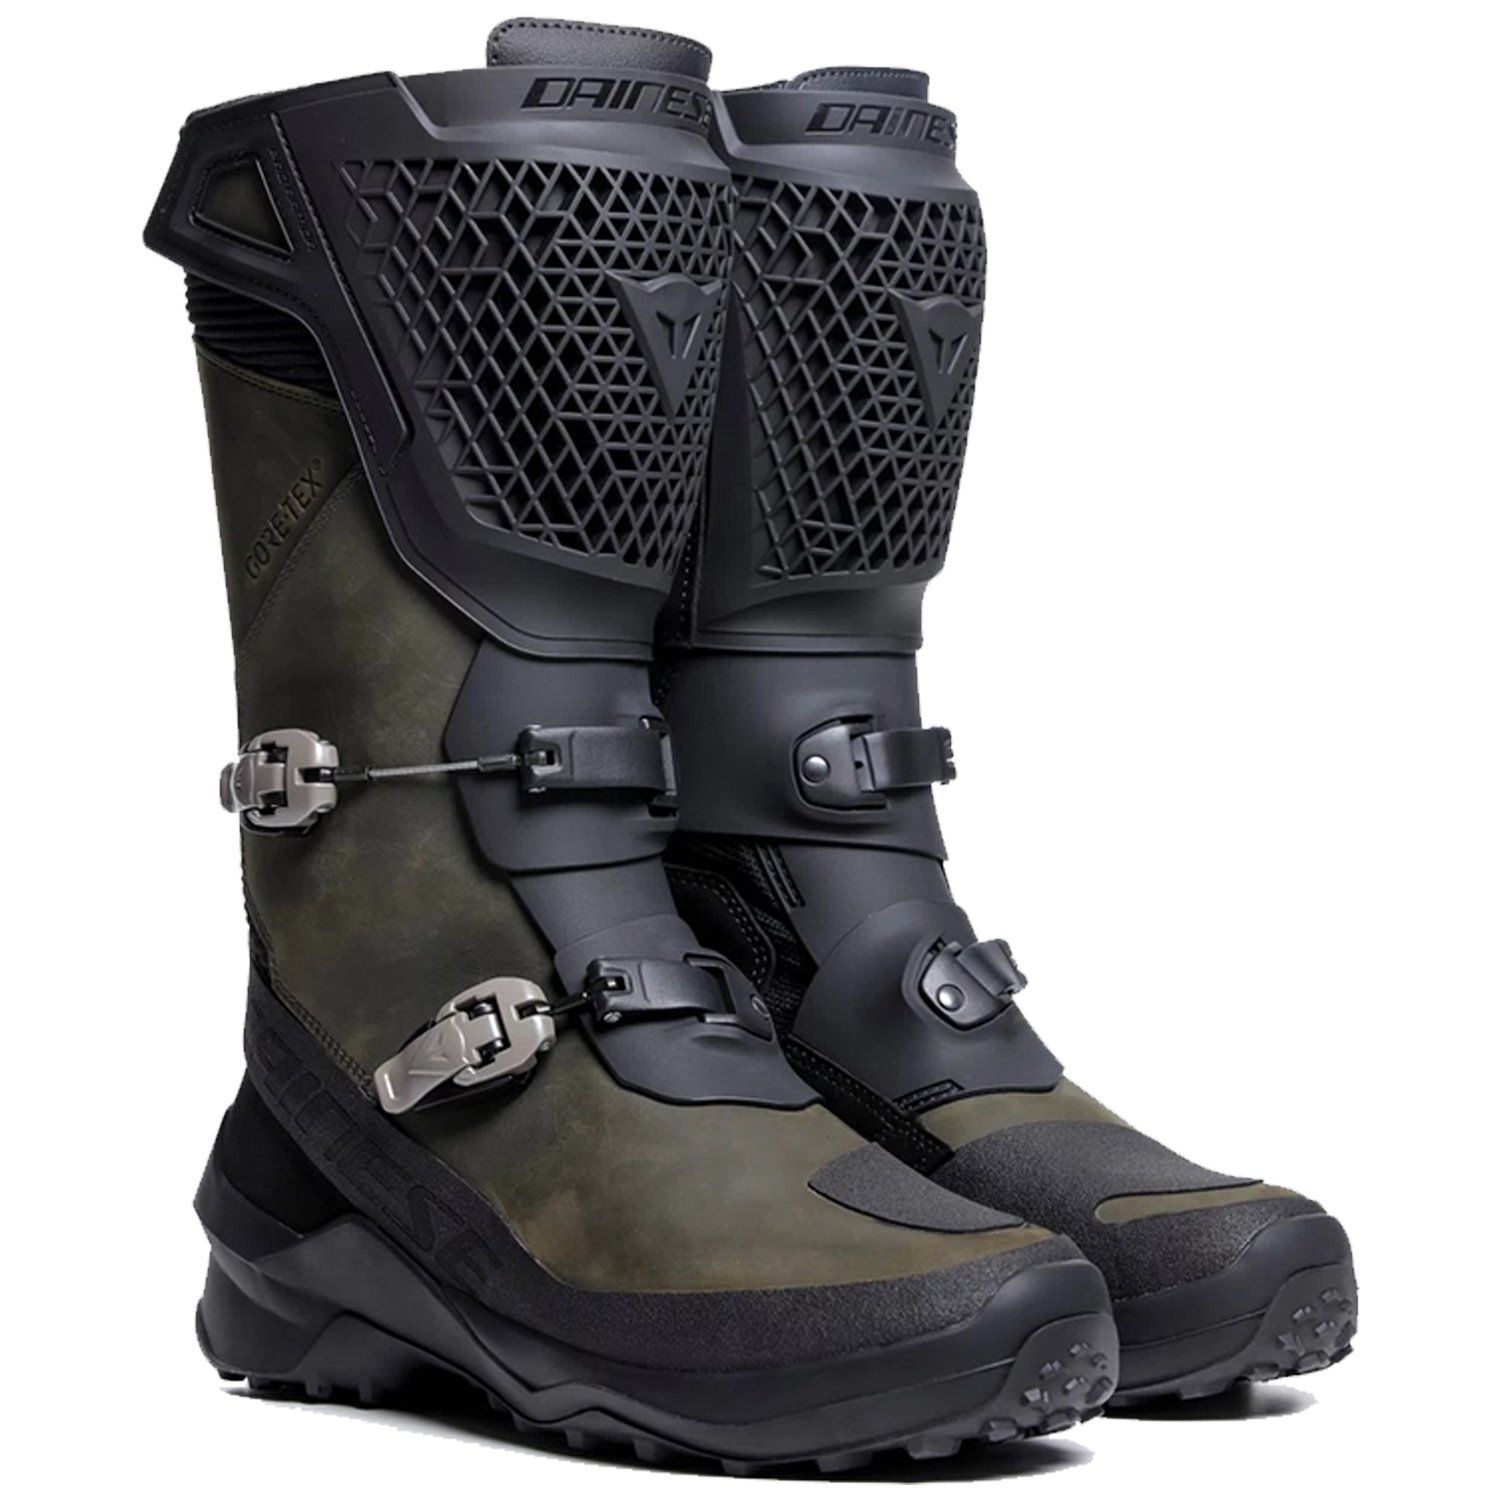 Image of Dainese Seeker Gore-Tex Boots Black Army Green Size 39 ID 8051019544476